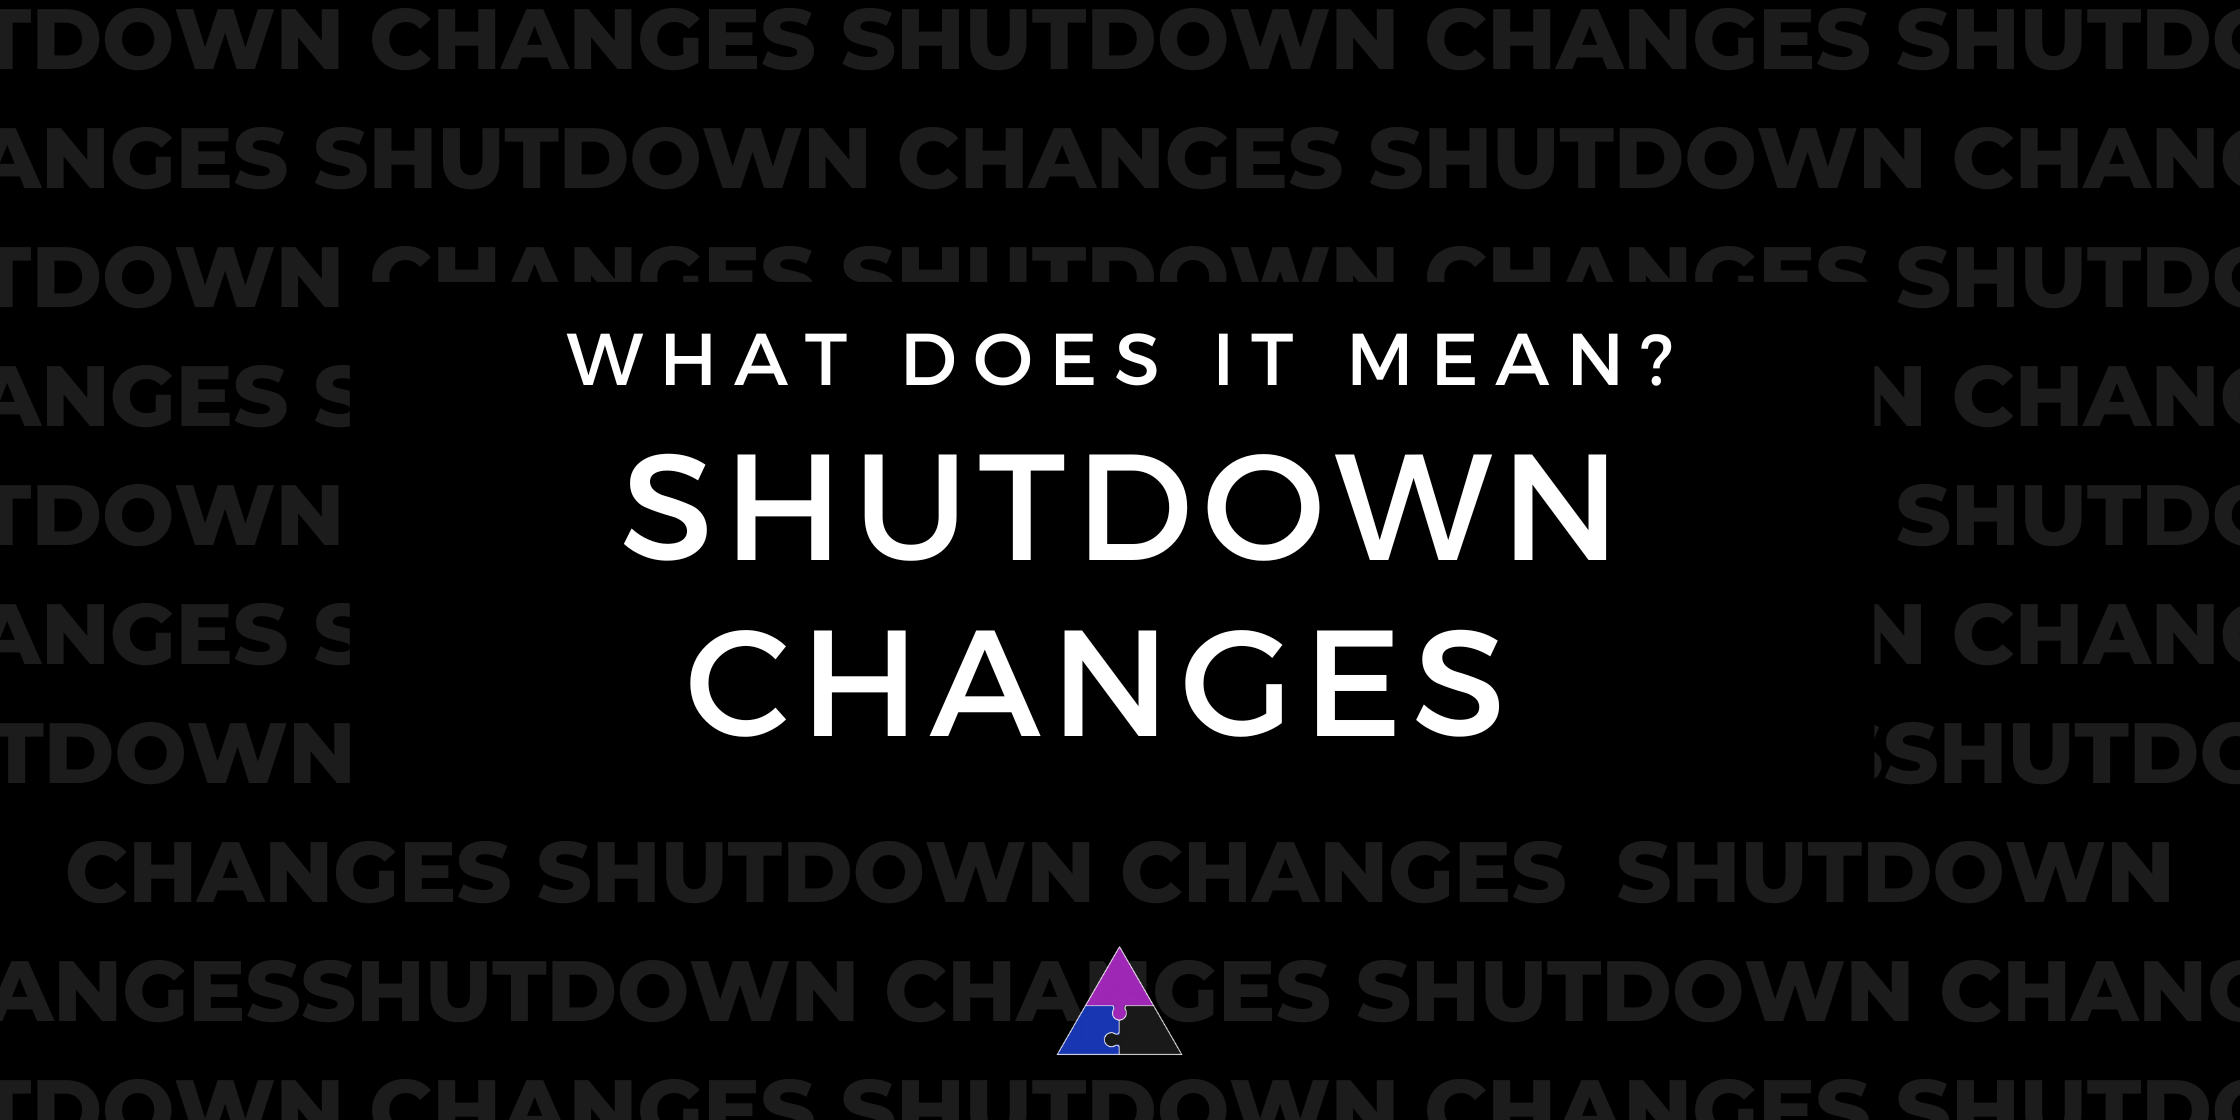 What does it mean? Shutdown changes